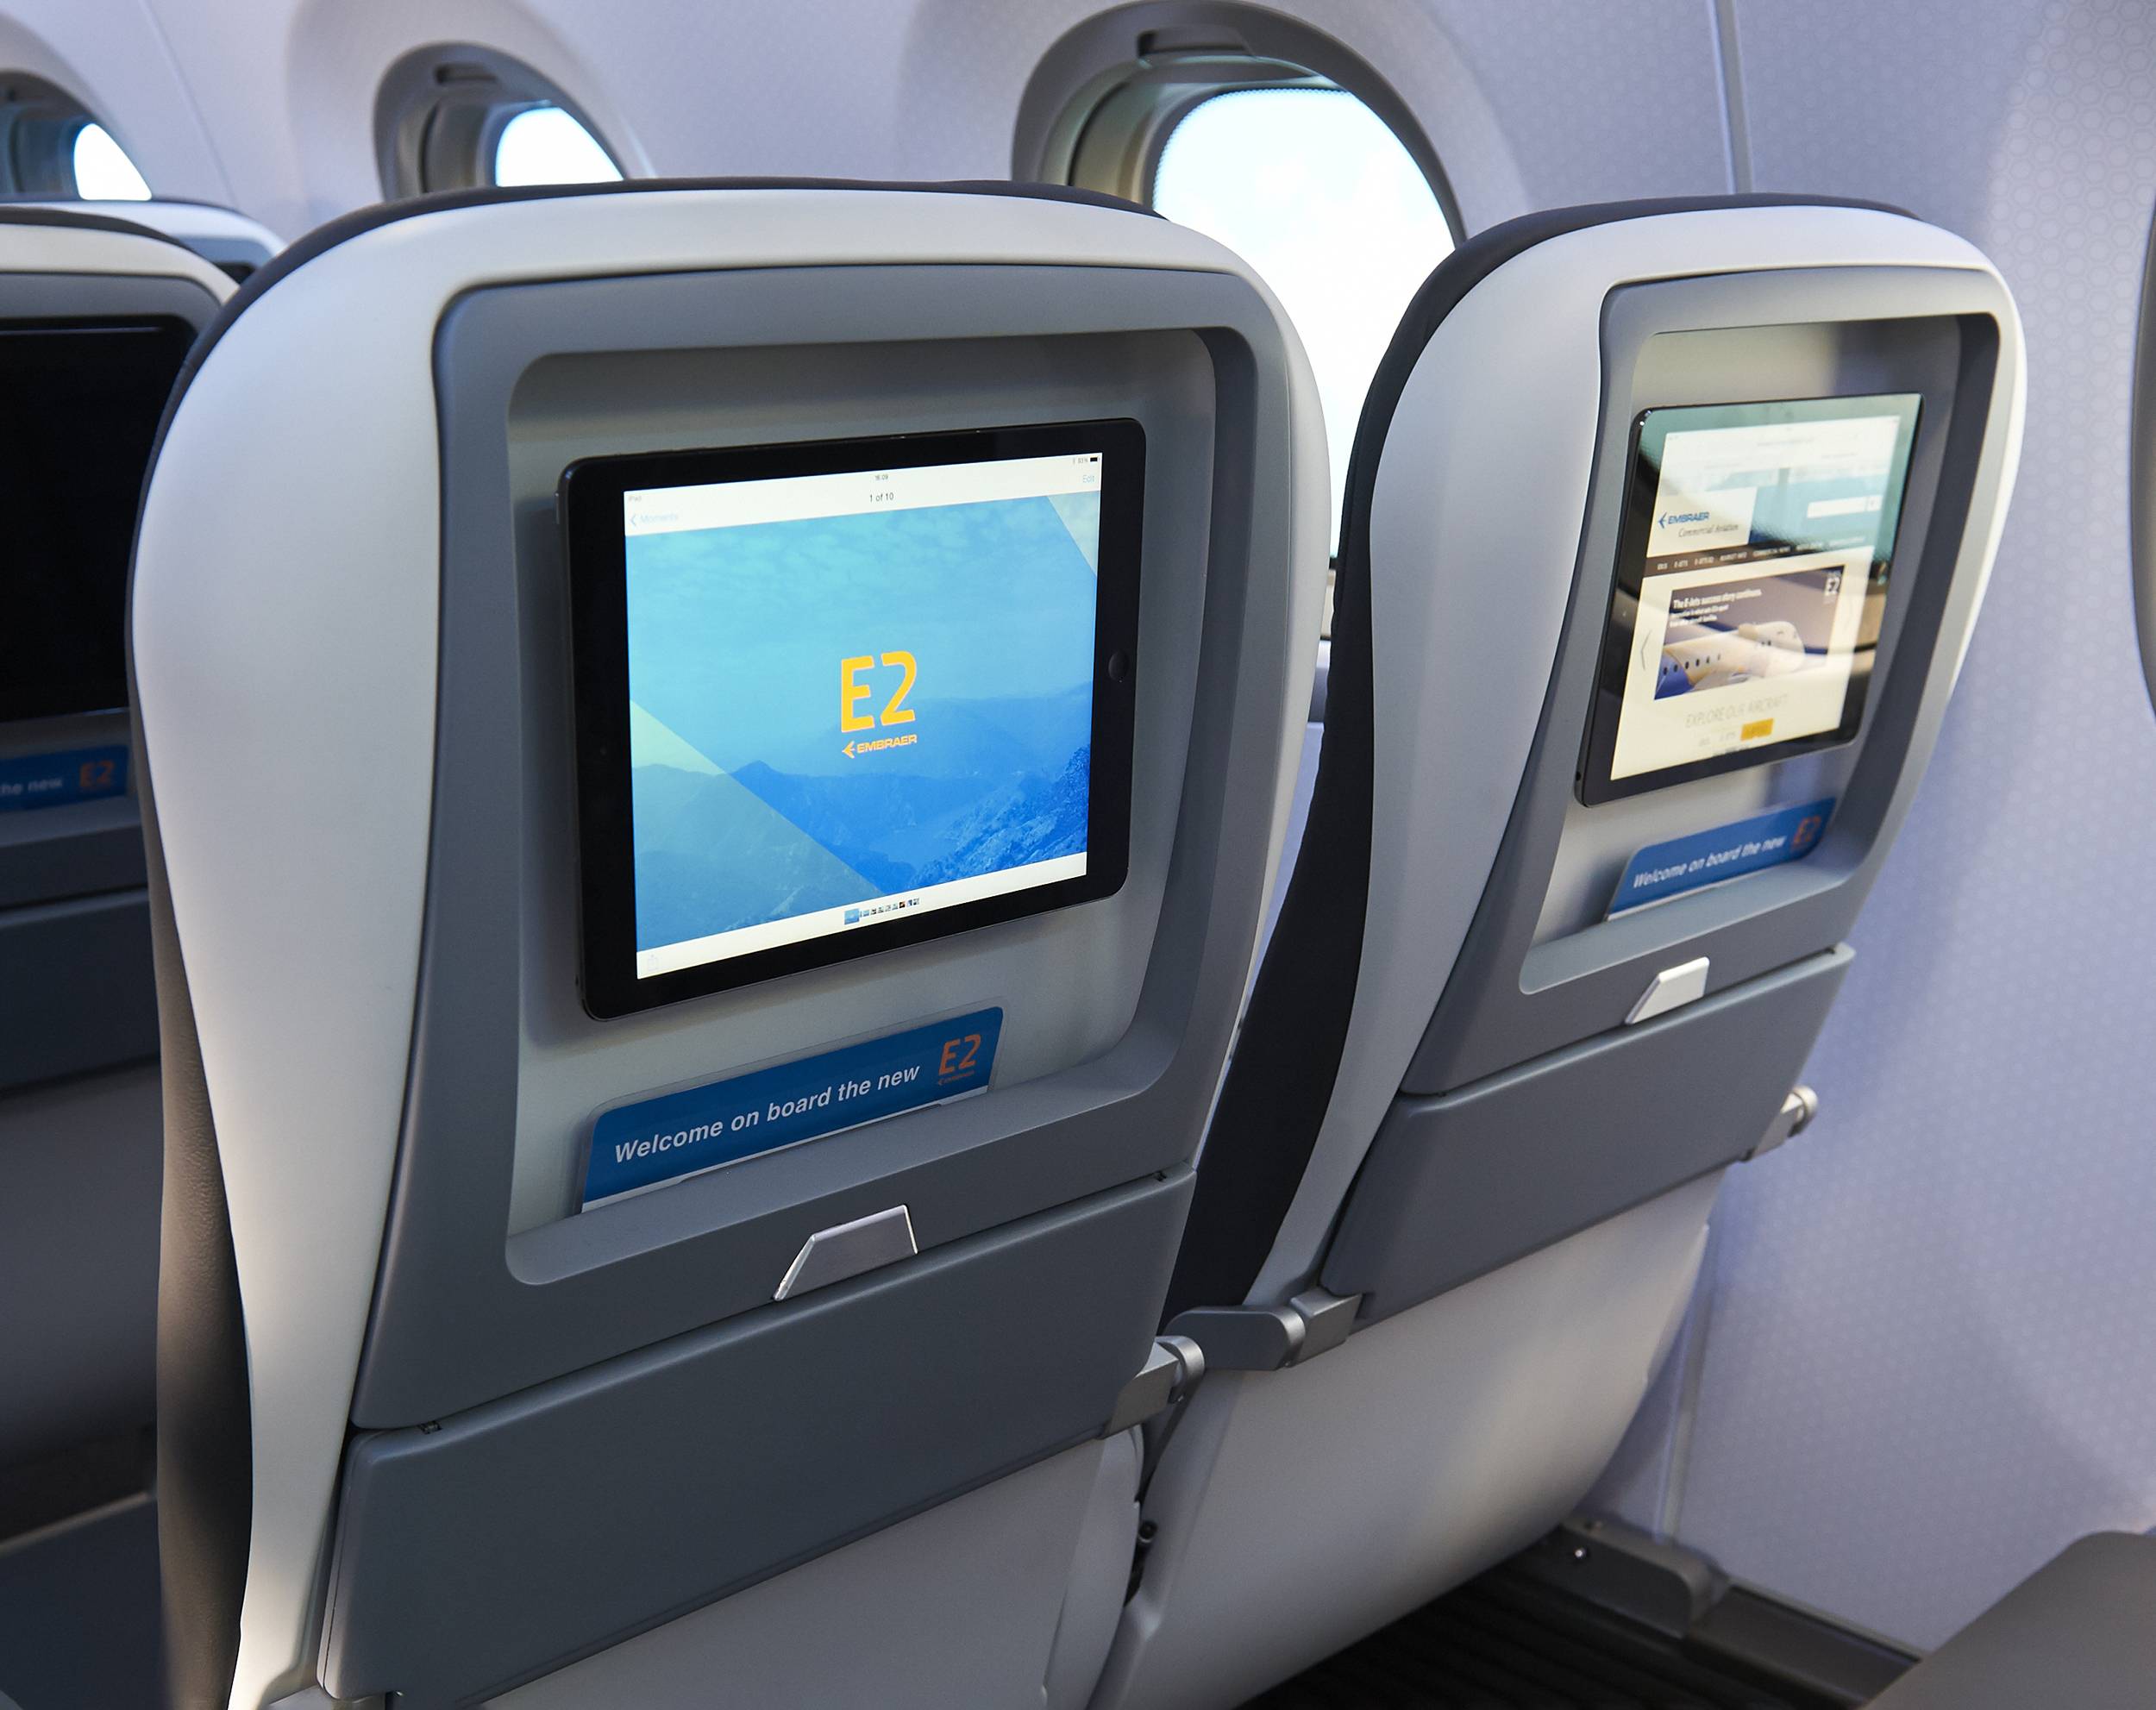 Back of aircraft seats showing IFE screens with a bespoke designed GUI for the Embraer E2 jet